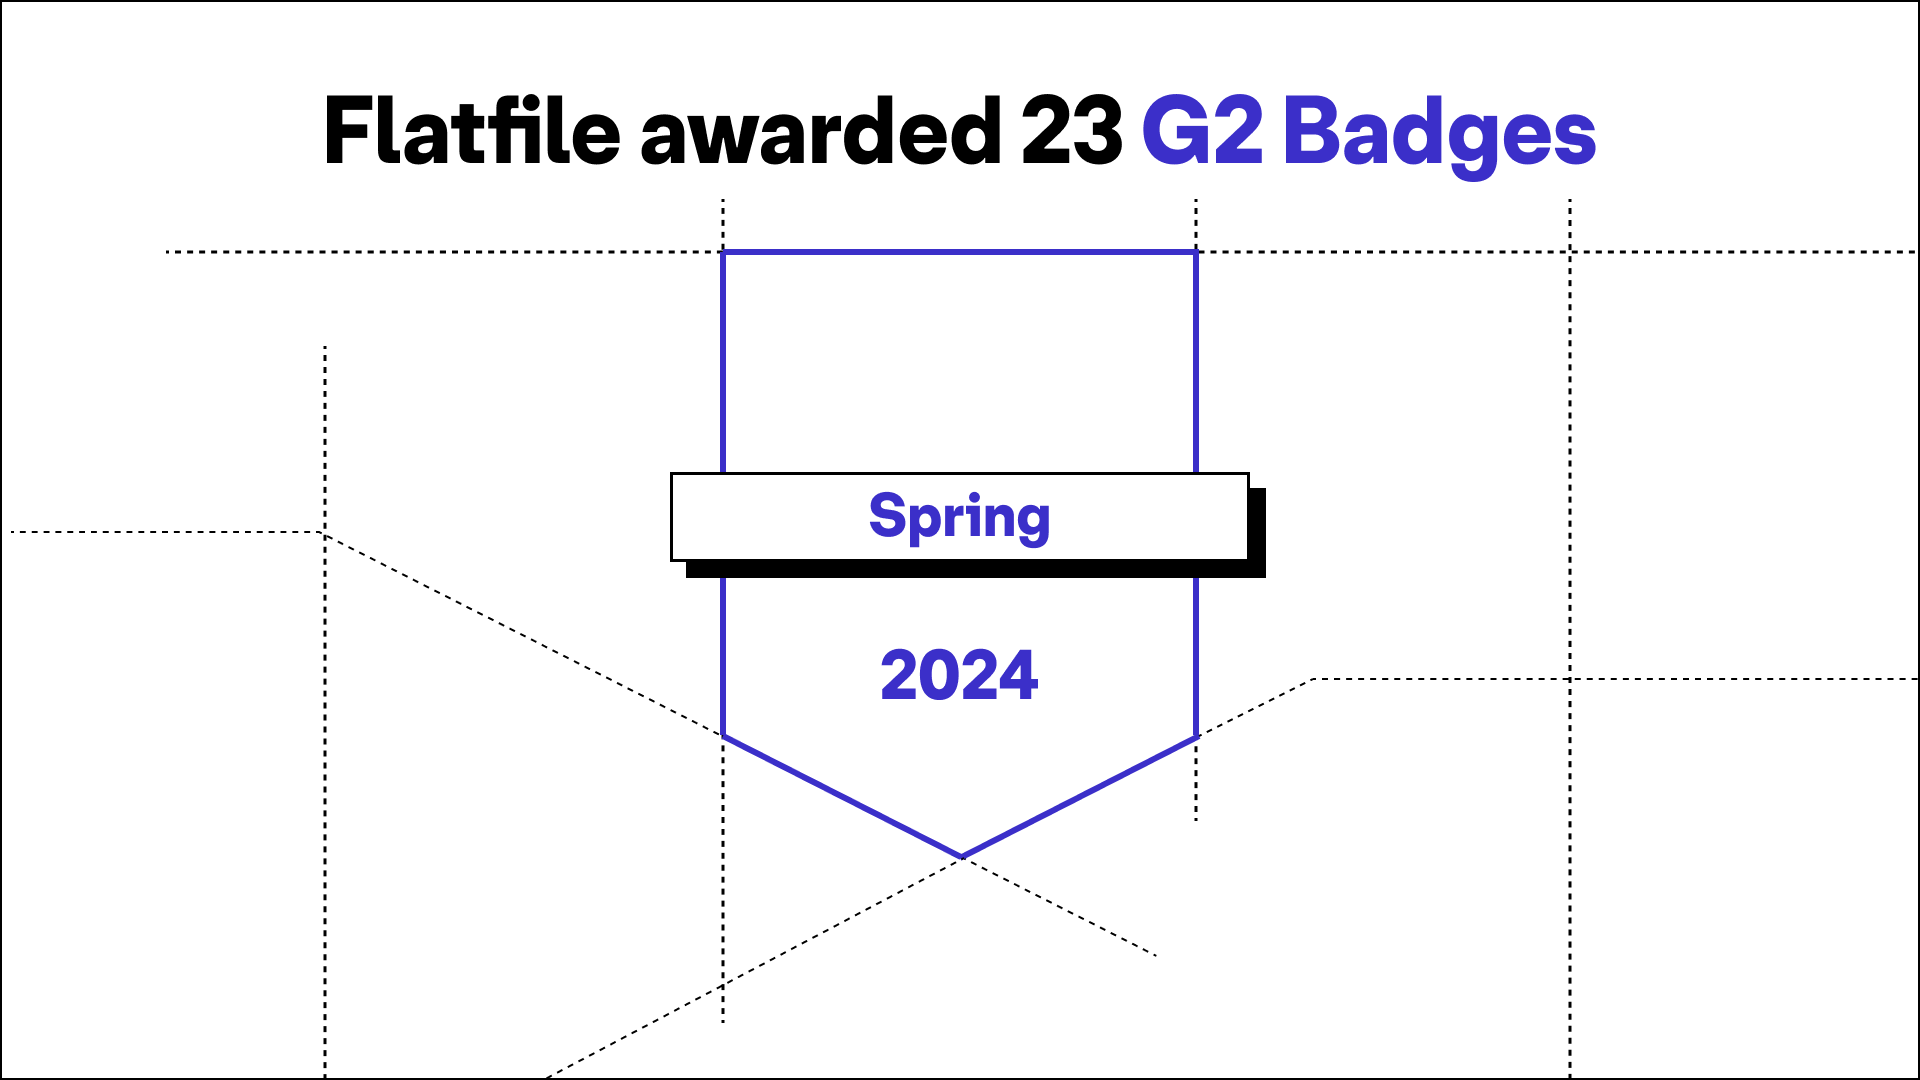 "Flatfile awarded 23 G2 Badges" on a white background with an icon representing a G2 badge